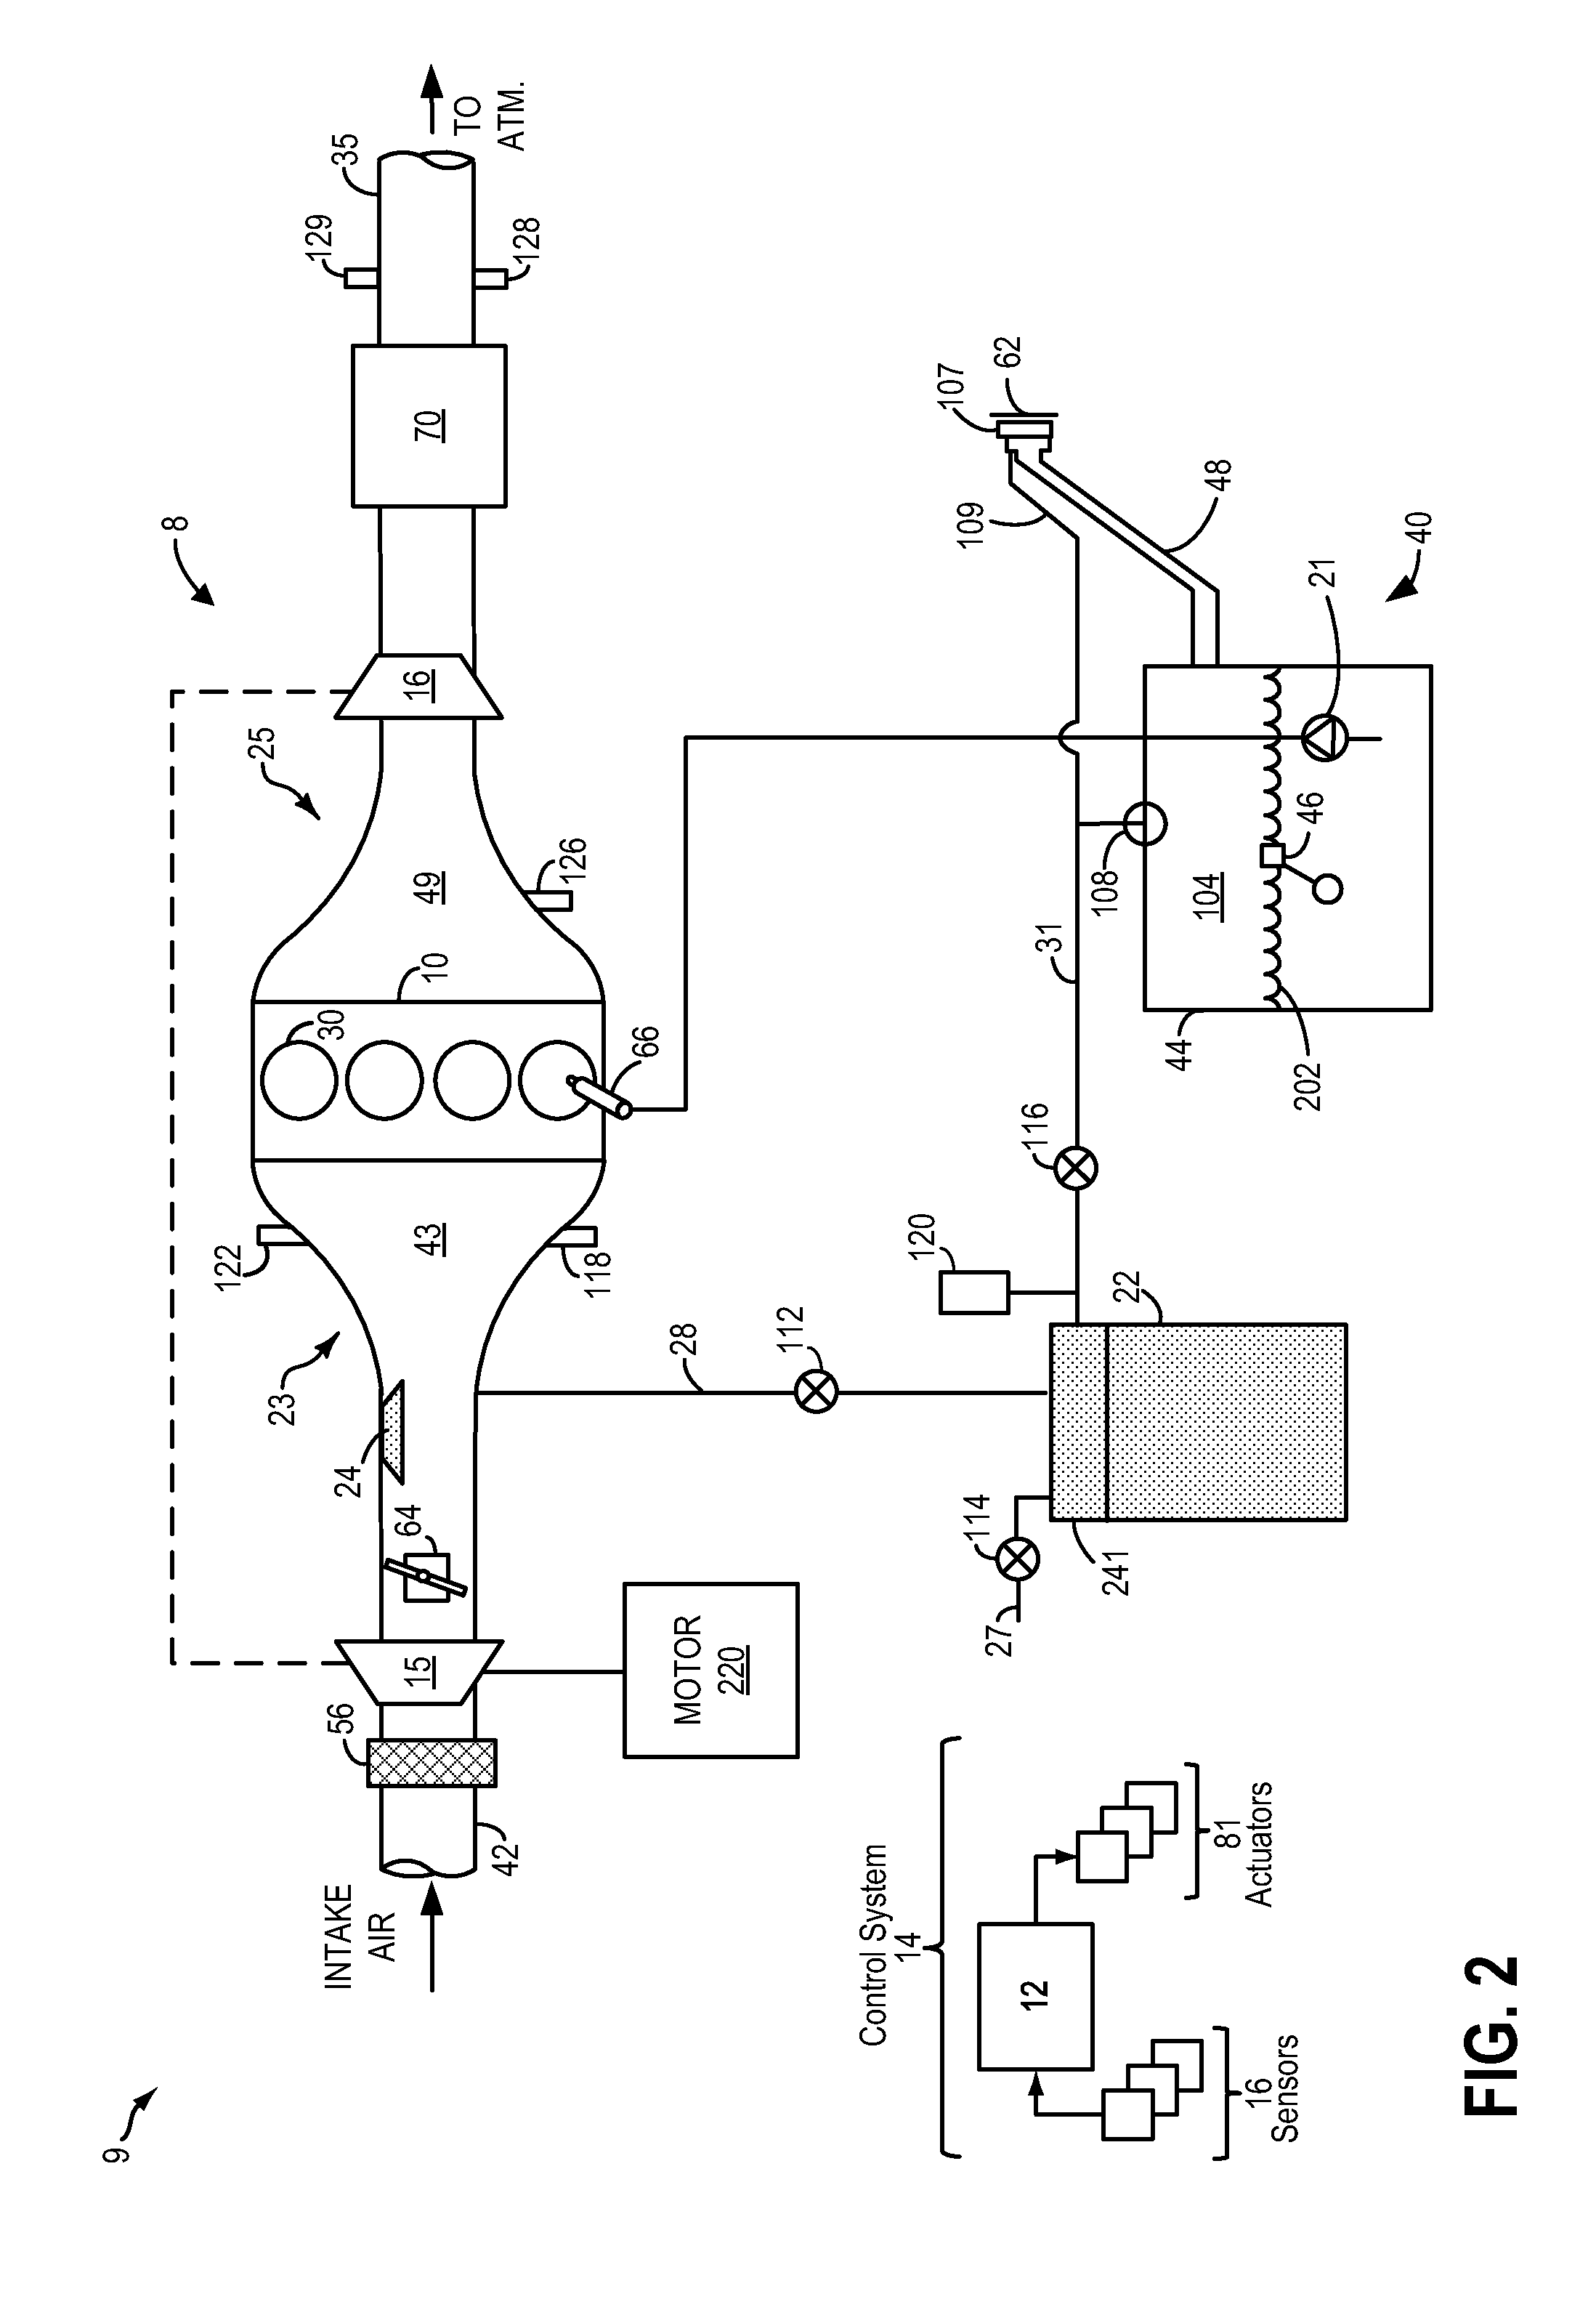 Method for purging of air intake system hydrocarbon trap